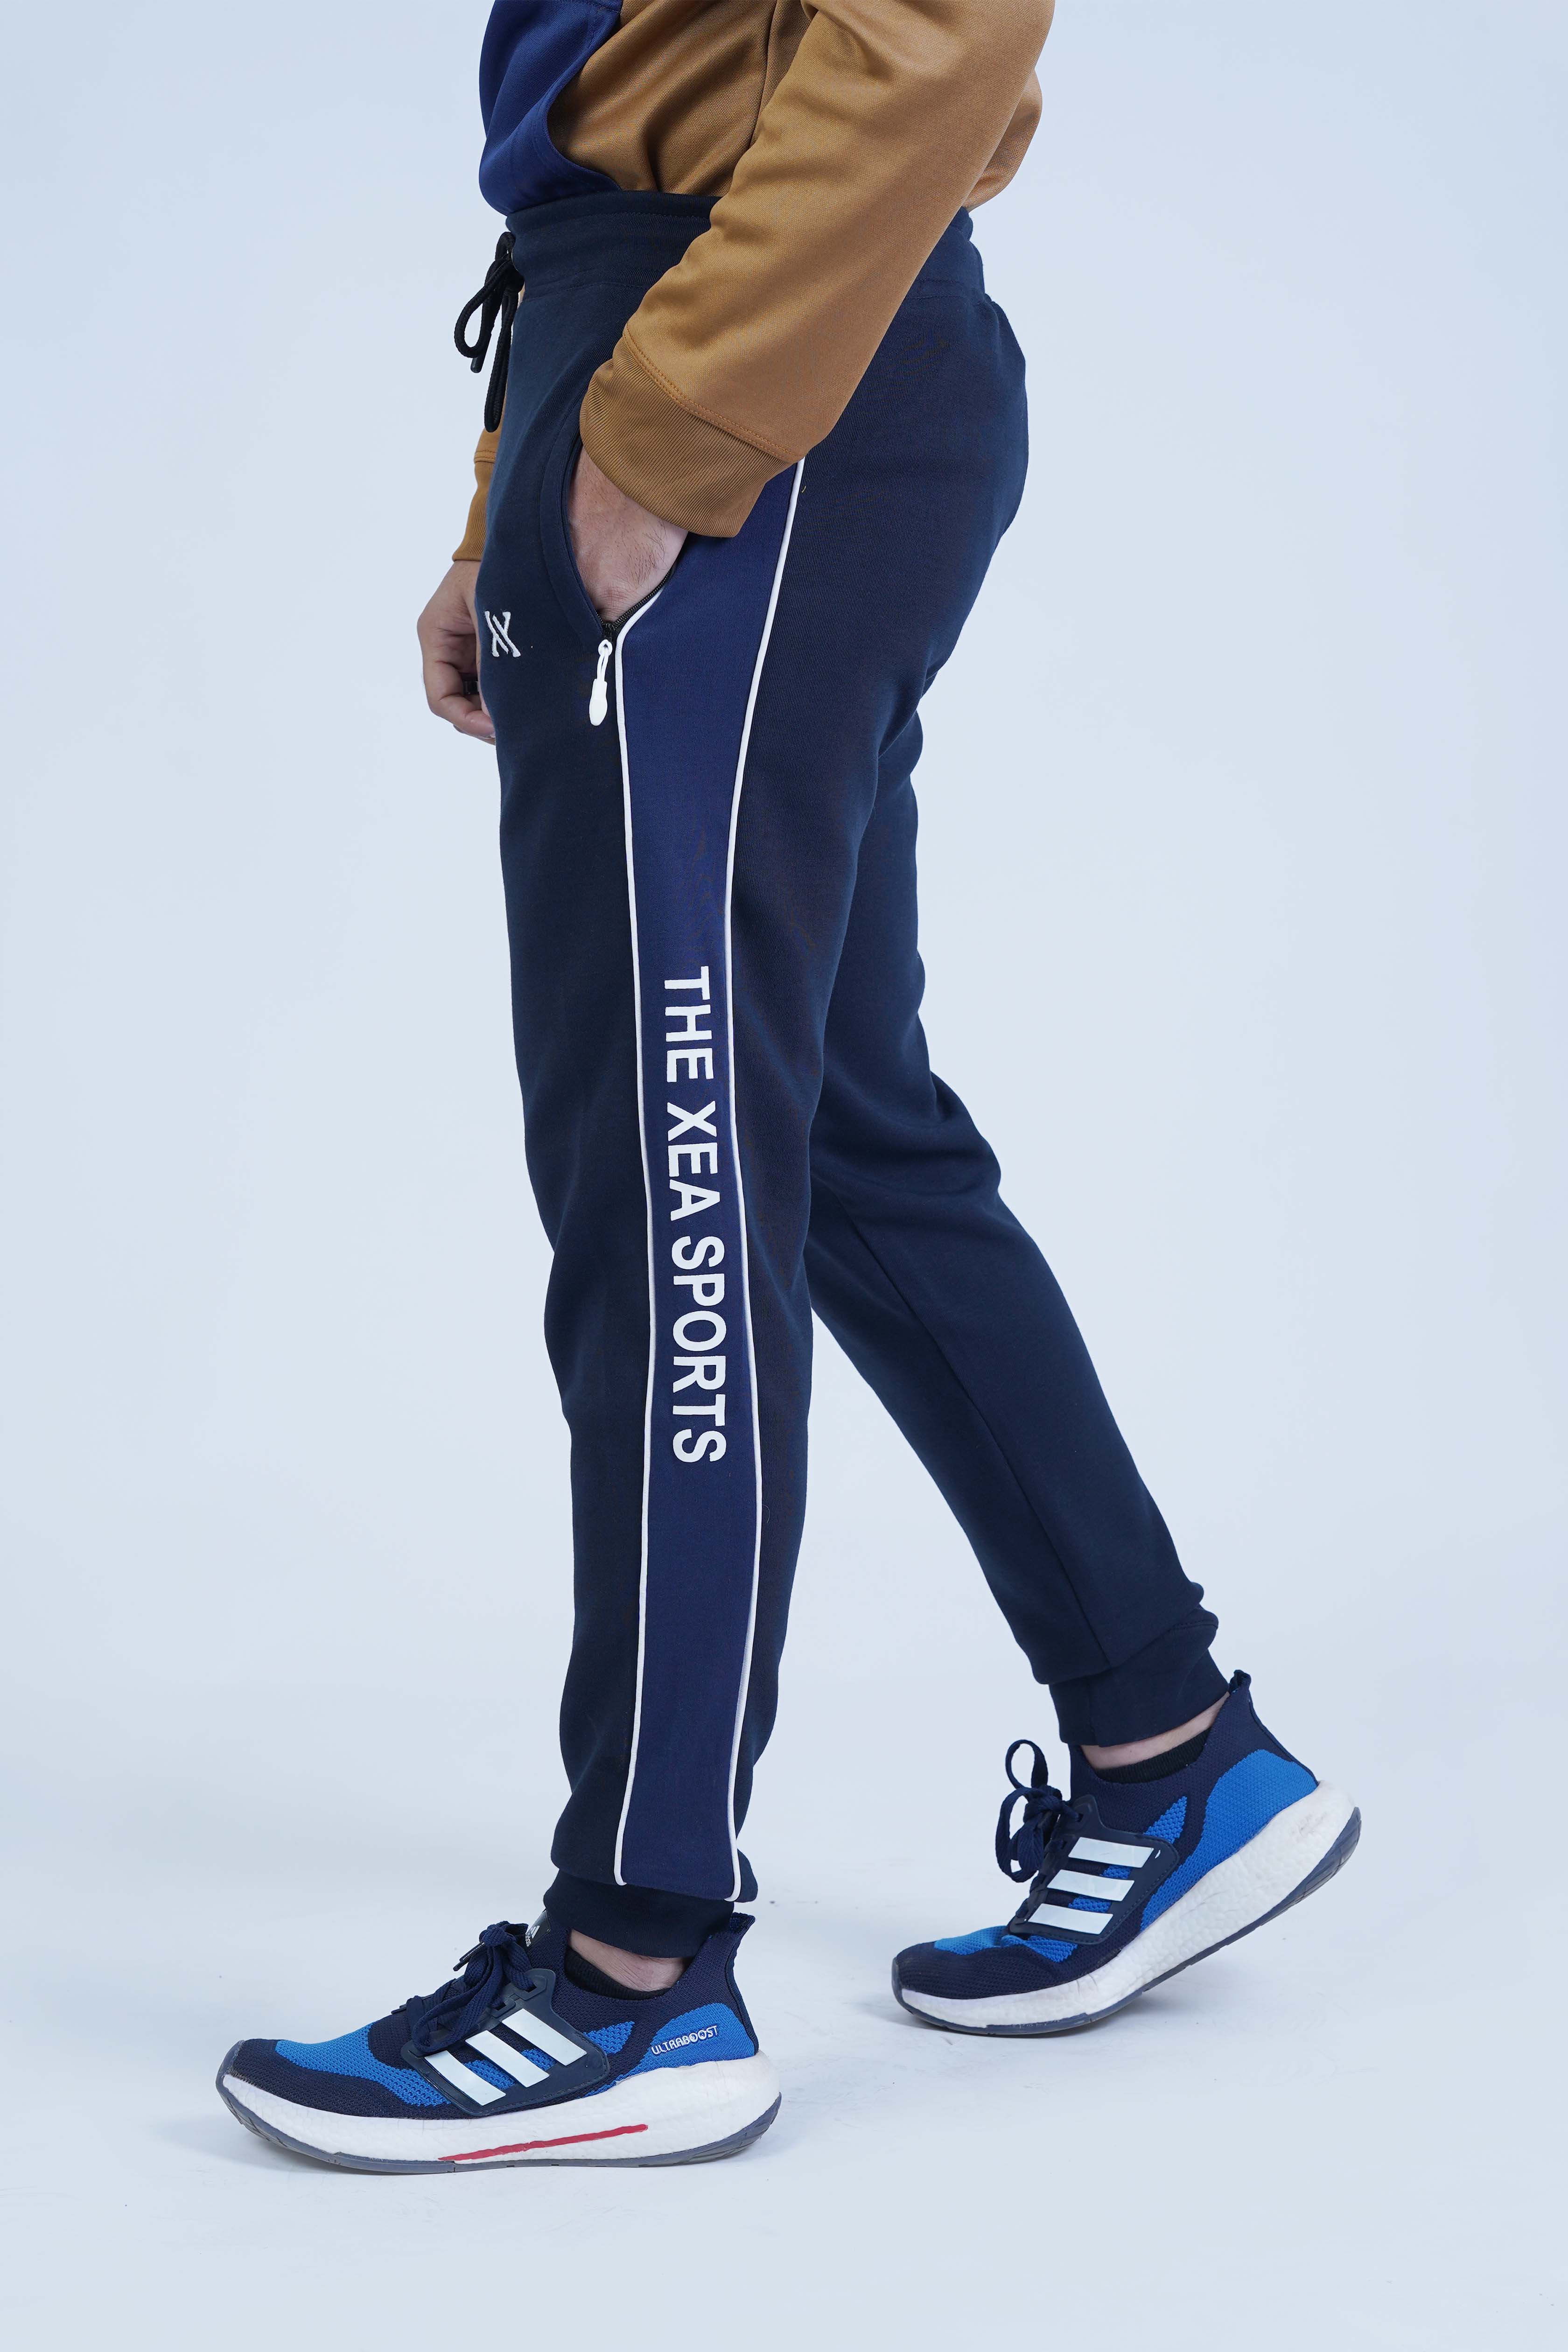 Sporty Vibes: The Xea Solid Blue Men Sports Trouser